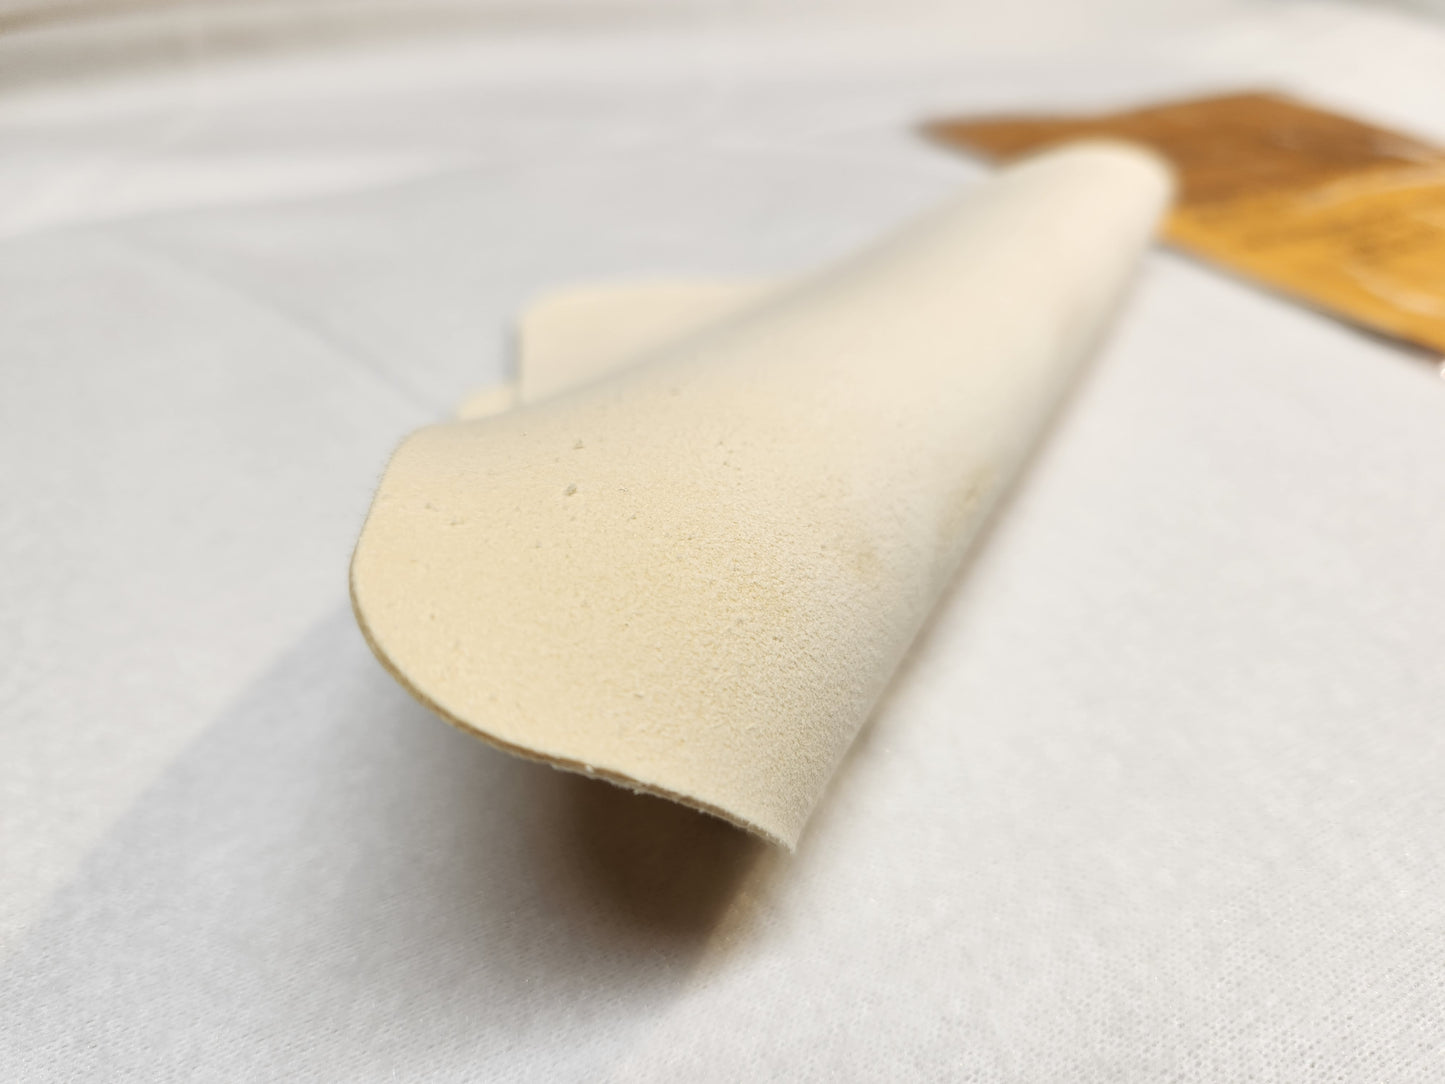 Chamois leather - 150mm x 150mm (for scissors maintenance and cleaning)